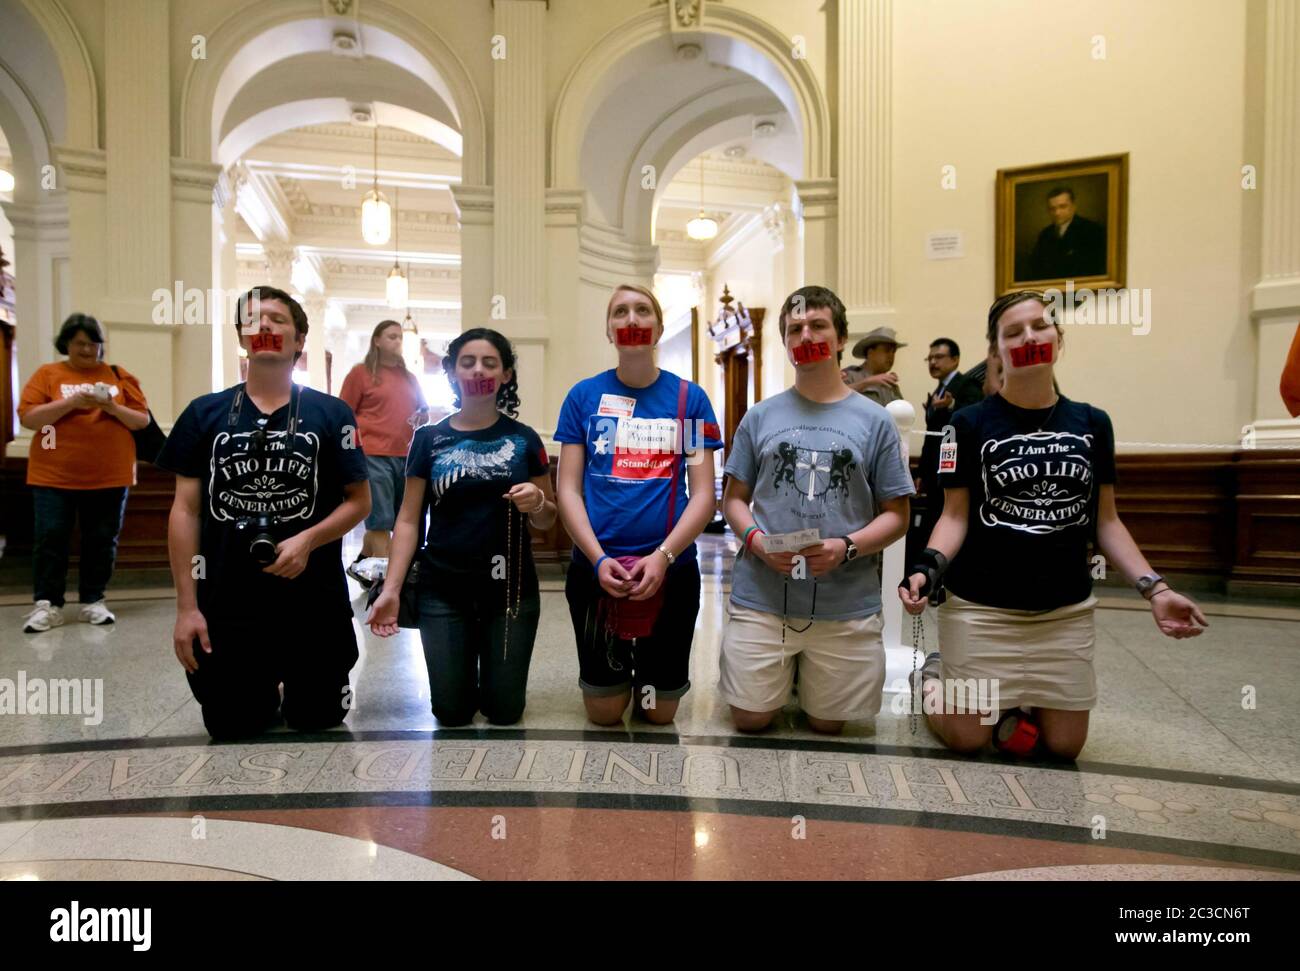 July 11, 2013 Austin, Texas USA: Abortion opponents, kneeling and with the word "life" taped over their mouths, pray during a pro-life rally at the Texas Capitol. Hundreds of pro-life and pro-choice supporters crowded into the building as state senators debated HB2, a controversial law putting tighter restrictions on women's access to abortions. The bill passed with a 19-11 vote, with all 18 Republicans and 1 Democrat voting yes. Earlier in the session, Sen. Wendy Davis's filibuster delayed action on the bill. ©Marjorie Kamys Cotera/ Daemmrich Photography Stock Photo